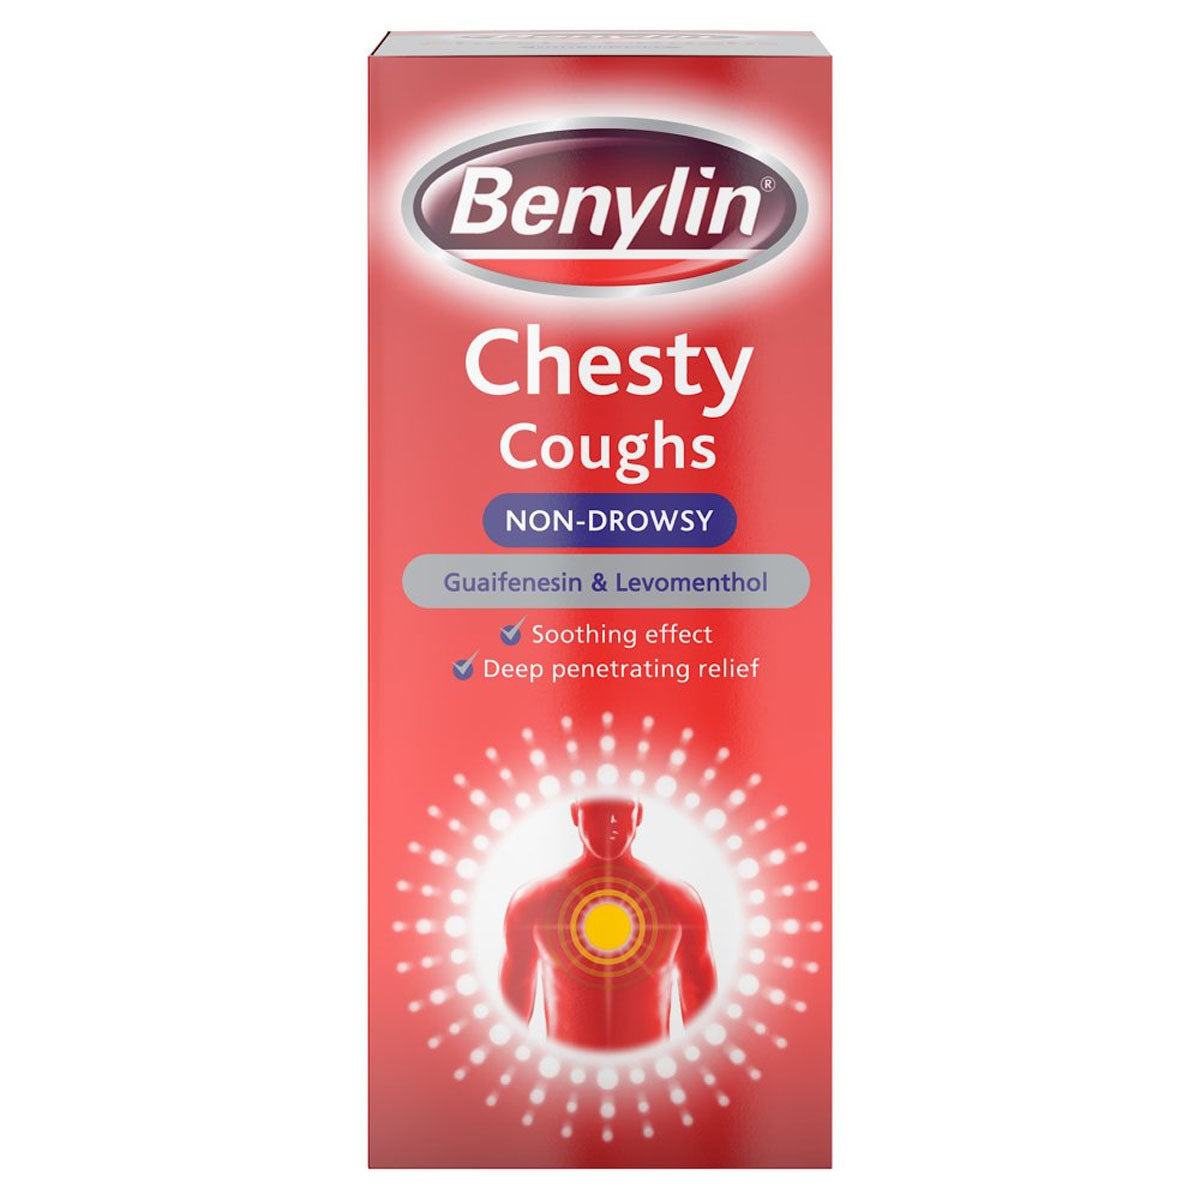 Benylin - Chesty Cough Syrup Non-Drowsy - 150ml - Continental Food Store